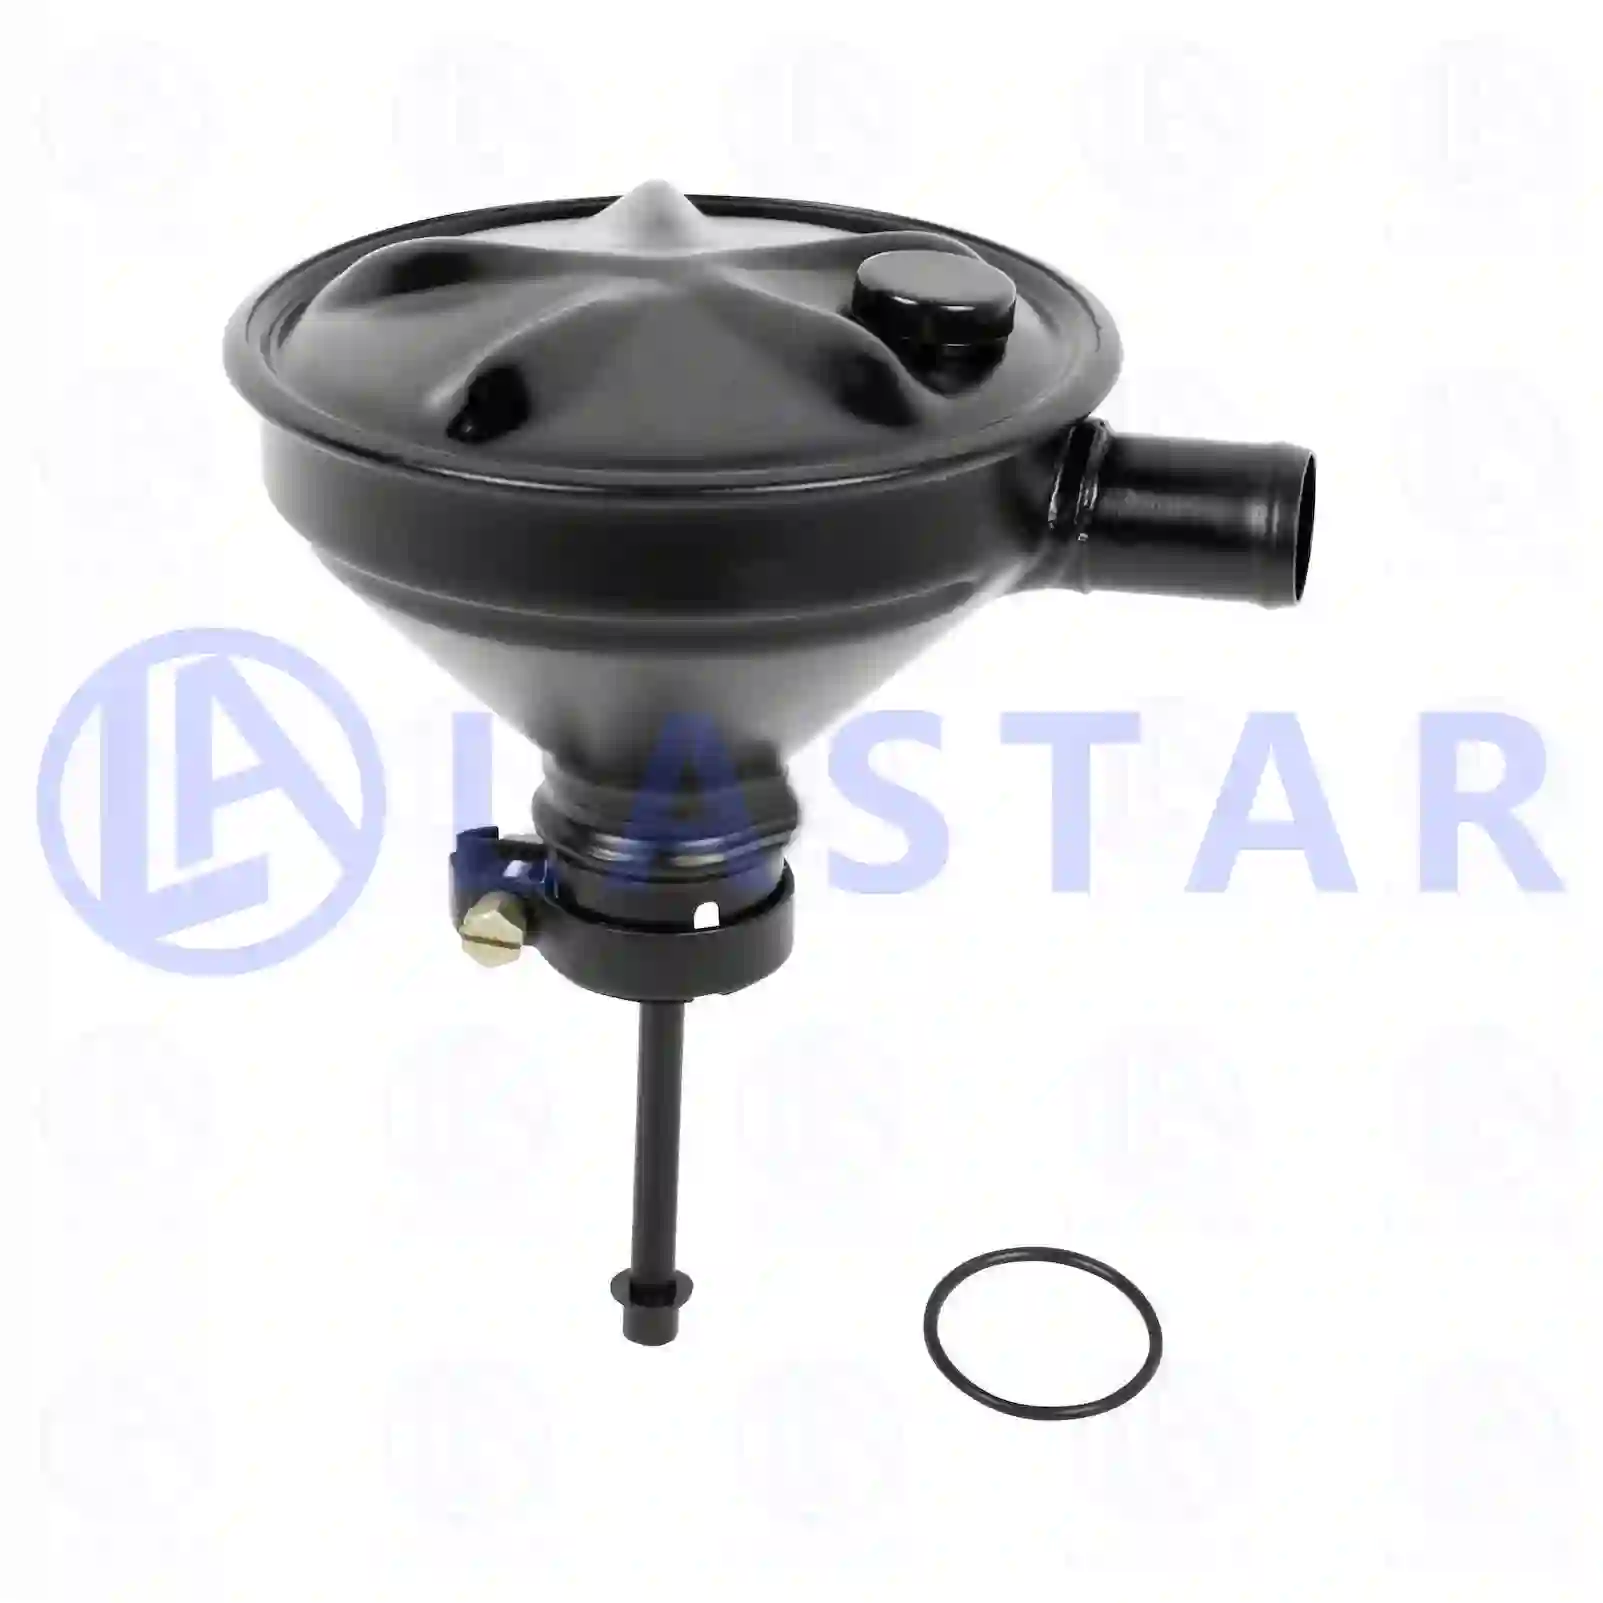  Oil separator, complete with o-ring || Lastar Spare Part | Truck Spare Parts, Auotomotive Spare Parts